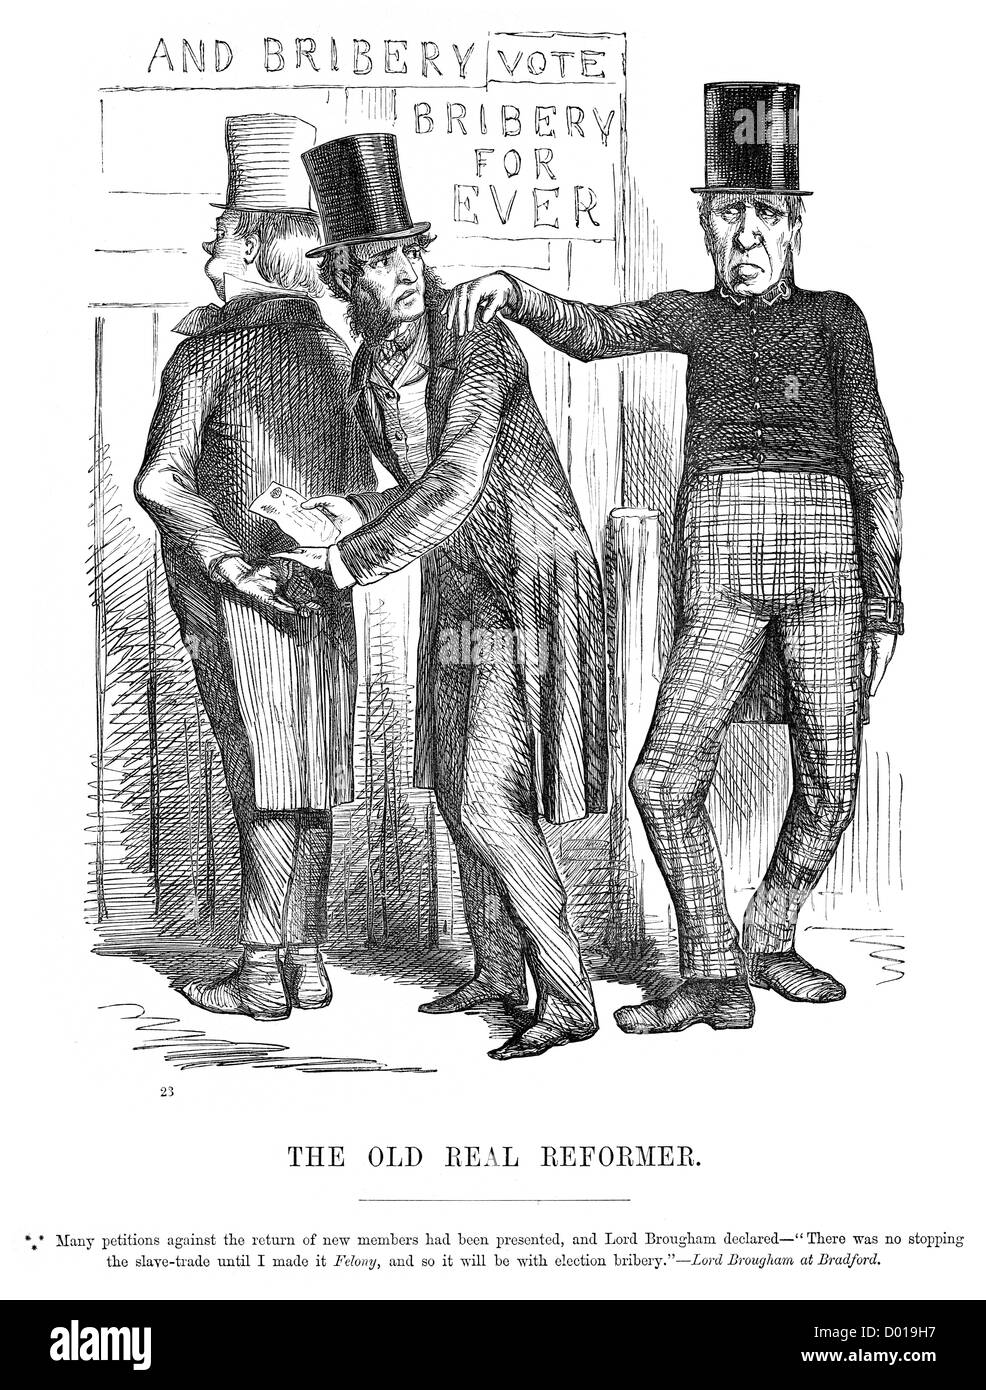 The Old Real Reformer. Caricature of corrupt politicians taking bribes, 1850s Stock Photo